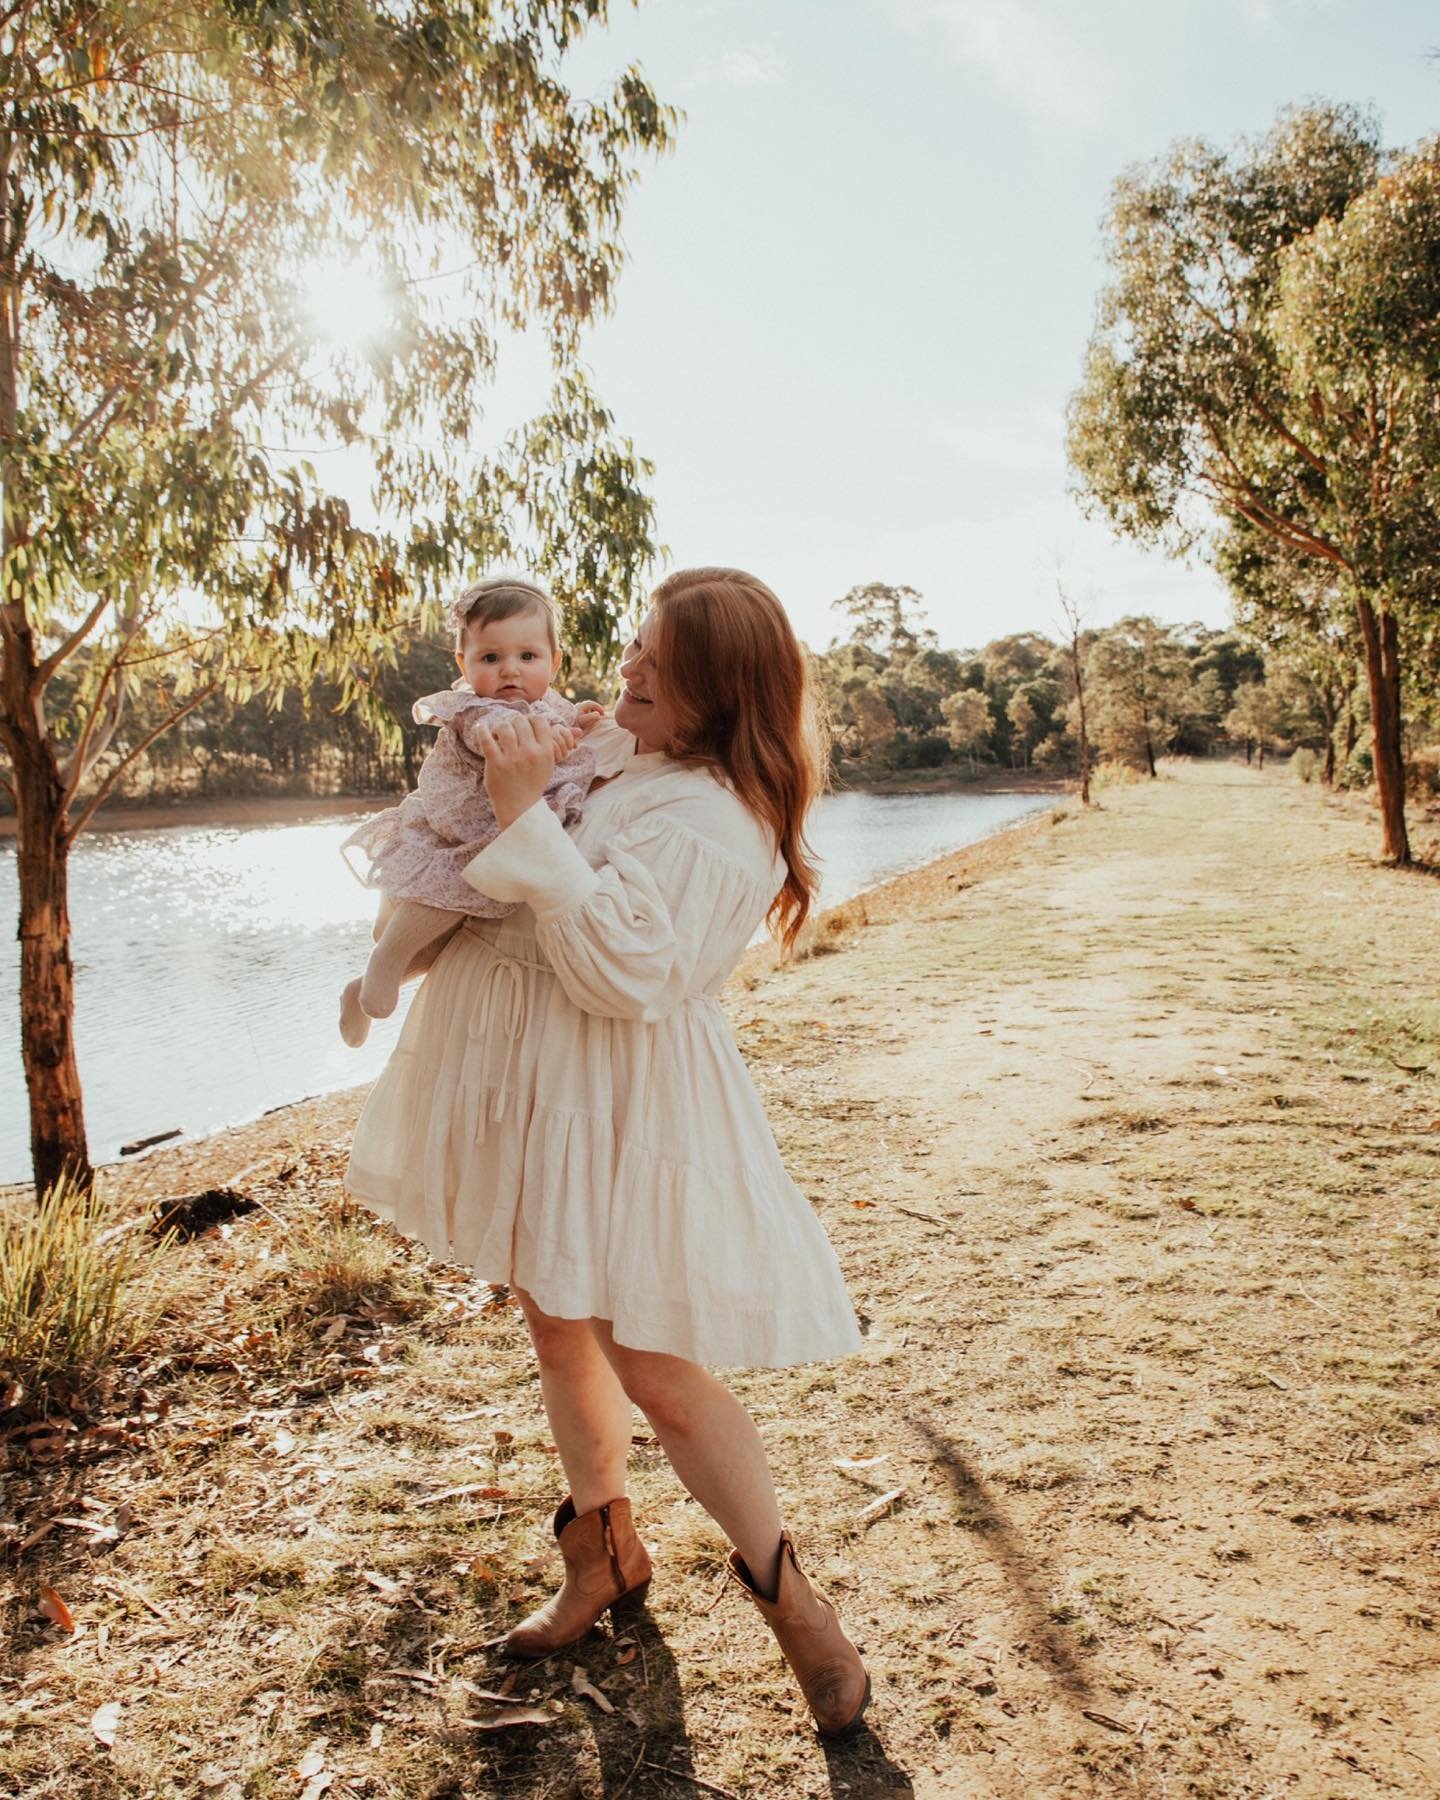 MOTHERS DAY SESSIONS TO DIE FOR ❤️
.
Madeline and Ella were lucky enough to be surprised with a sessions by pretty amazing husband and Dad! Memories to treasure forever! 
.
Happy Mother&rsquo;s Day to all the Mums today! 
.
#mothersdaymini #mothersda